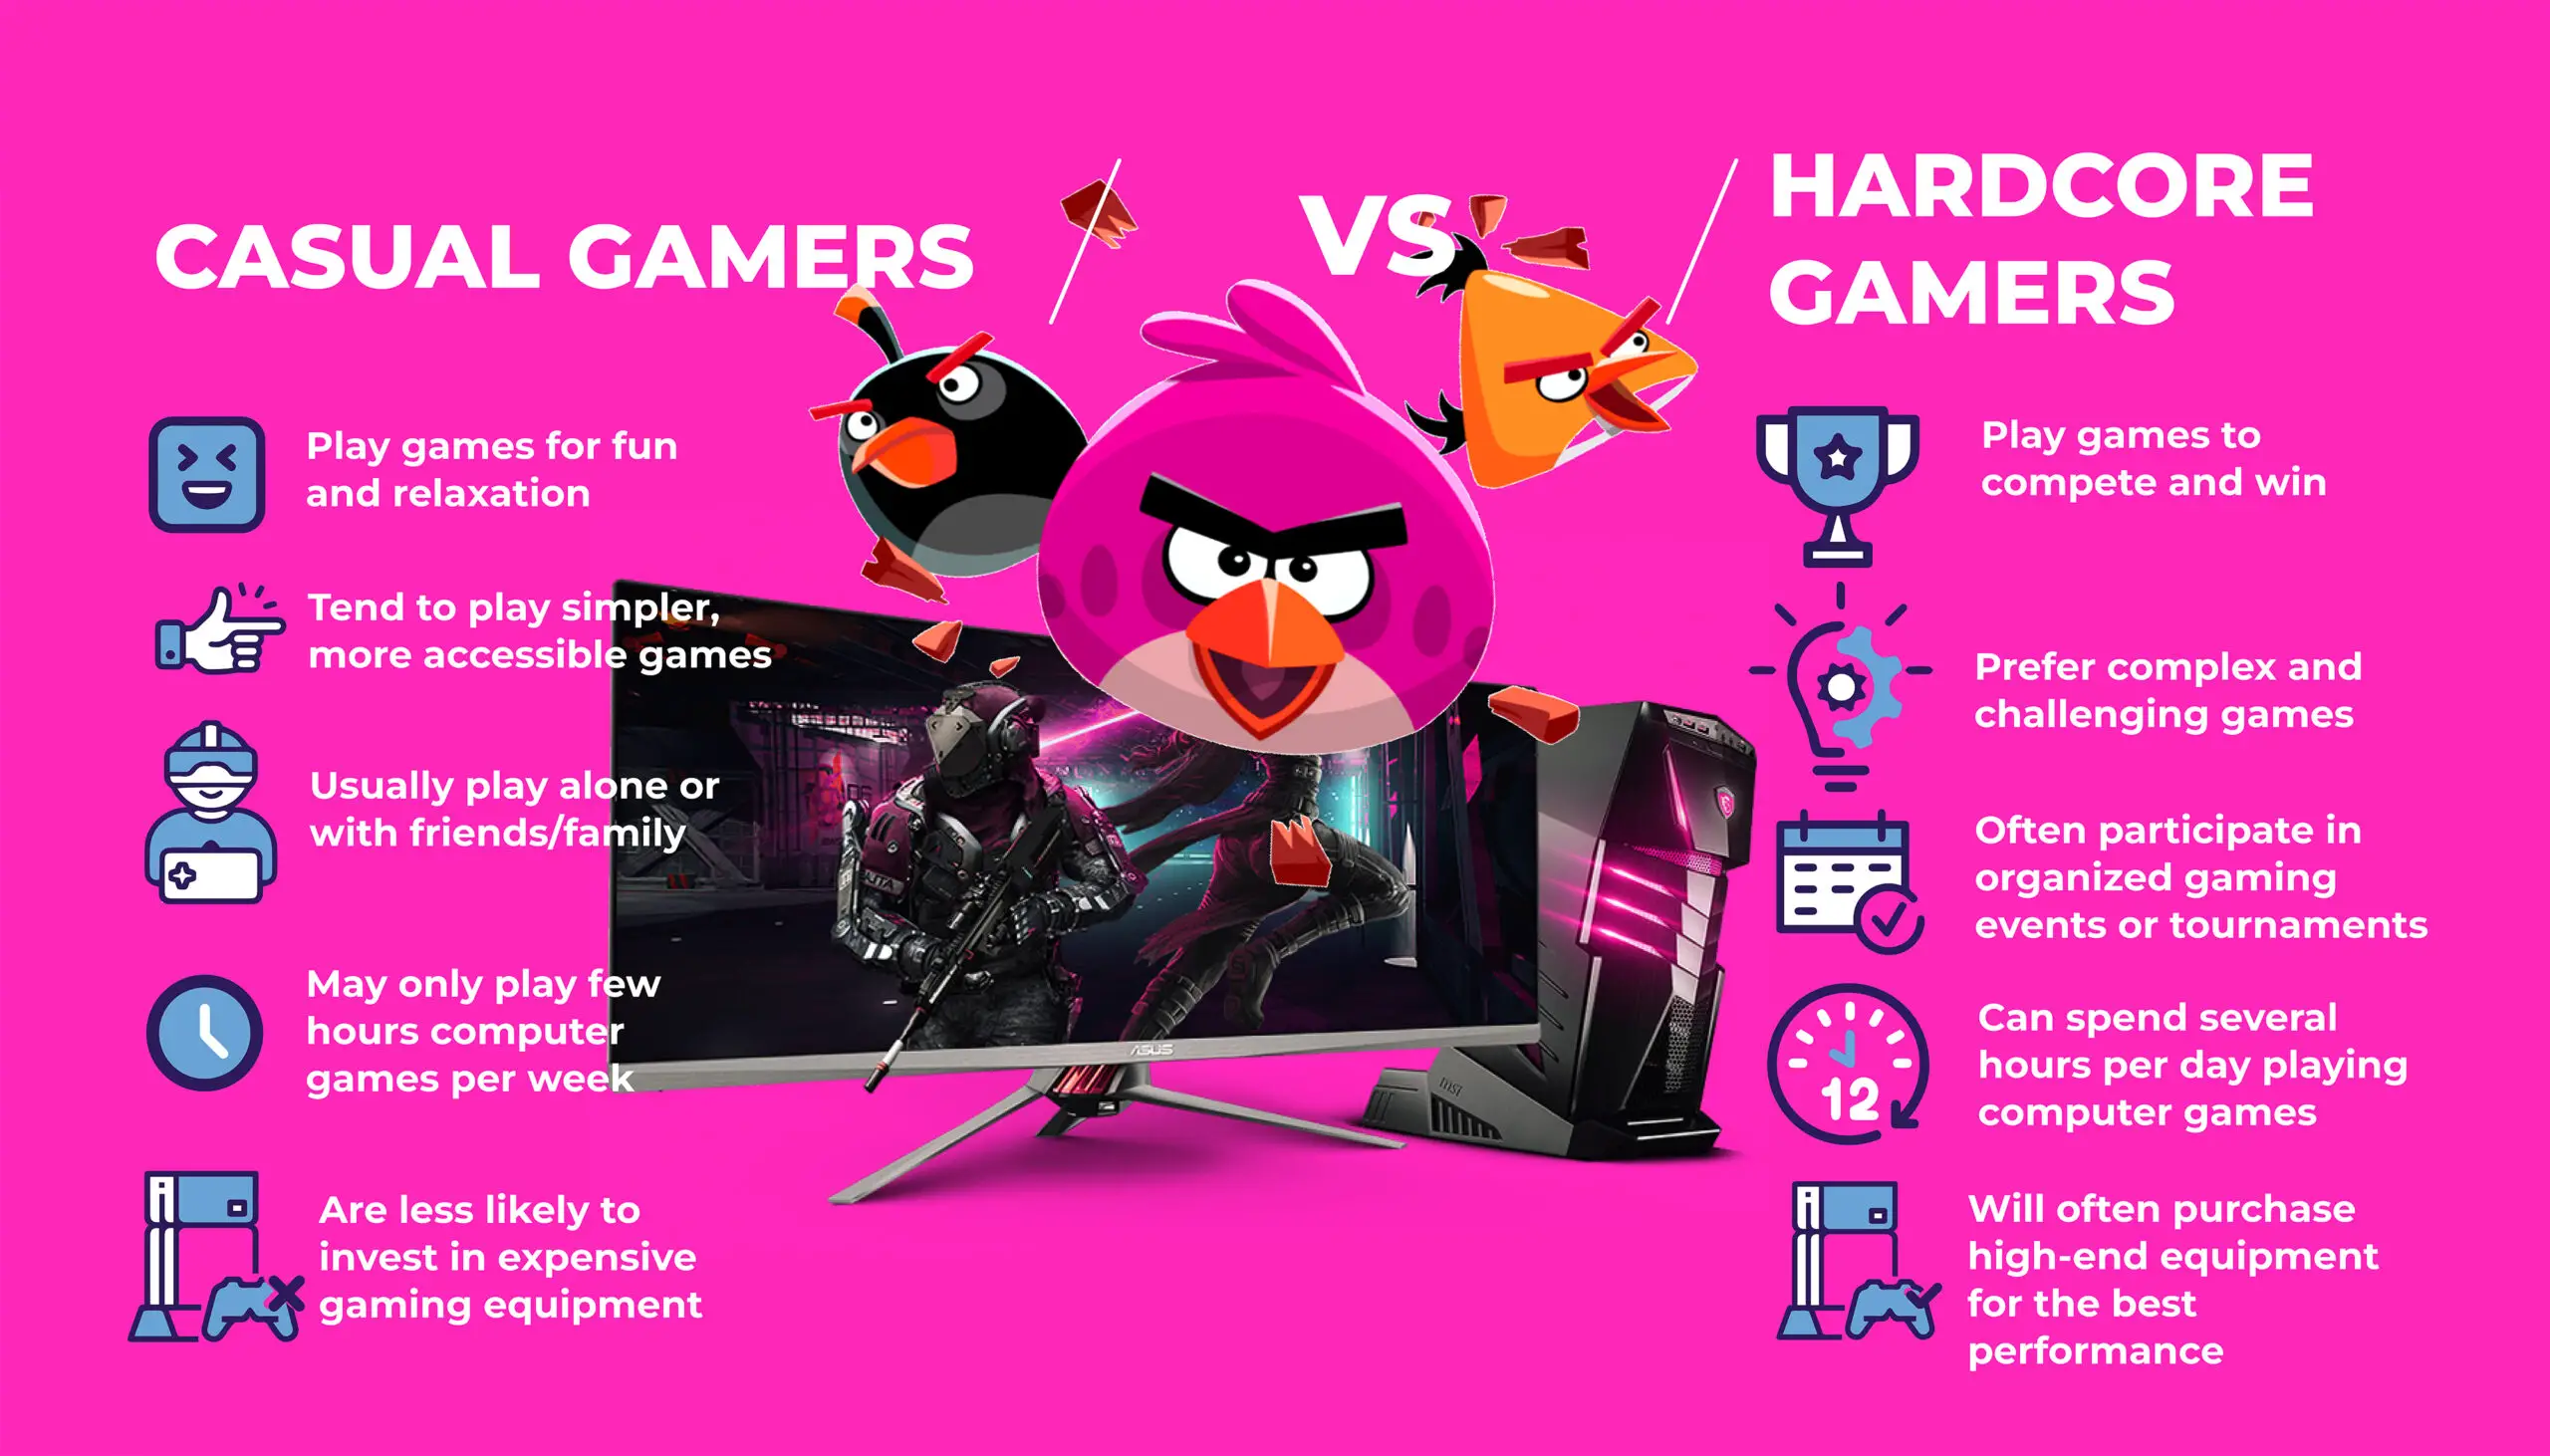 Casual Gamers vs. Hardcore Gamers infographic